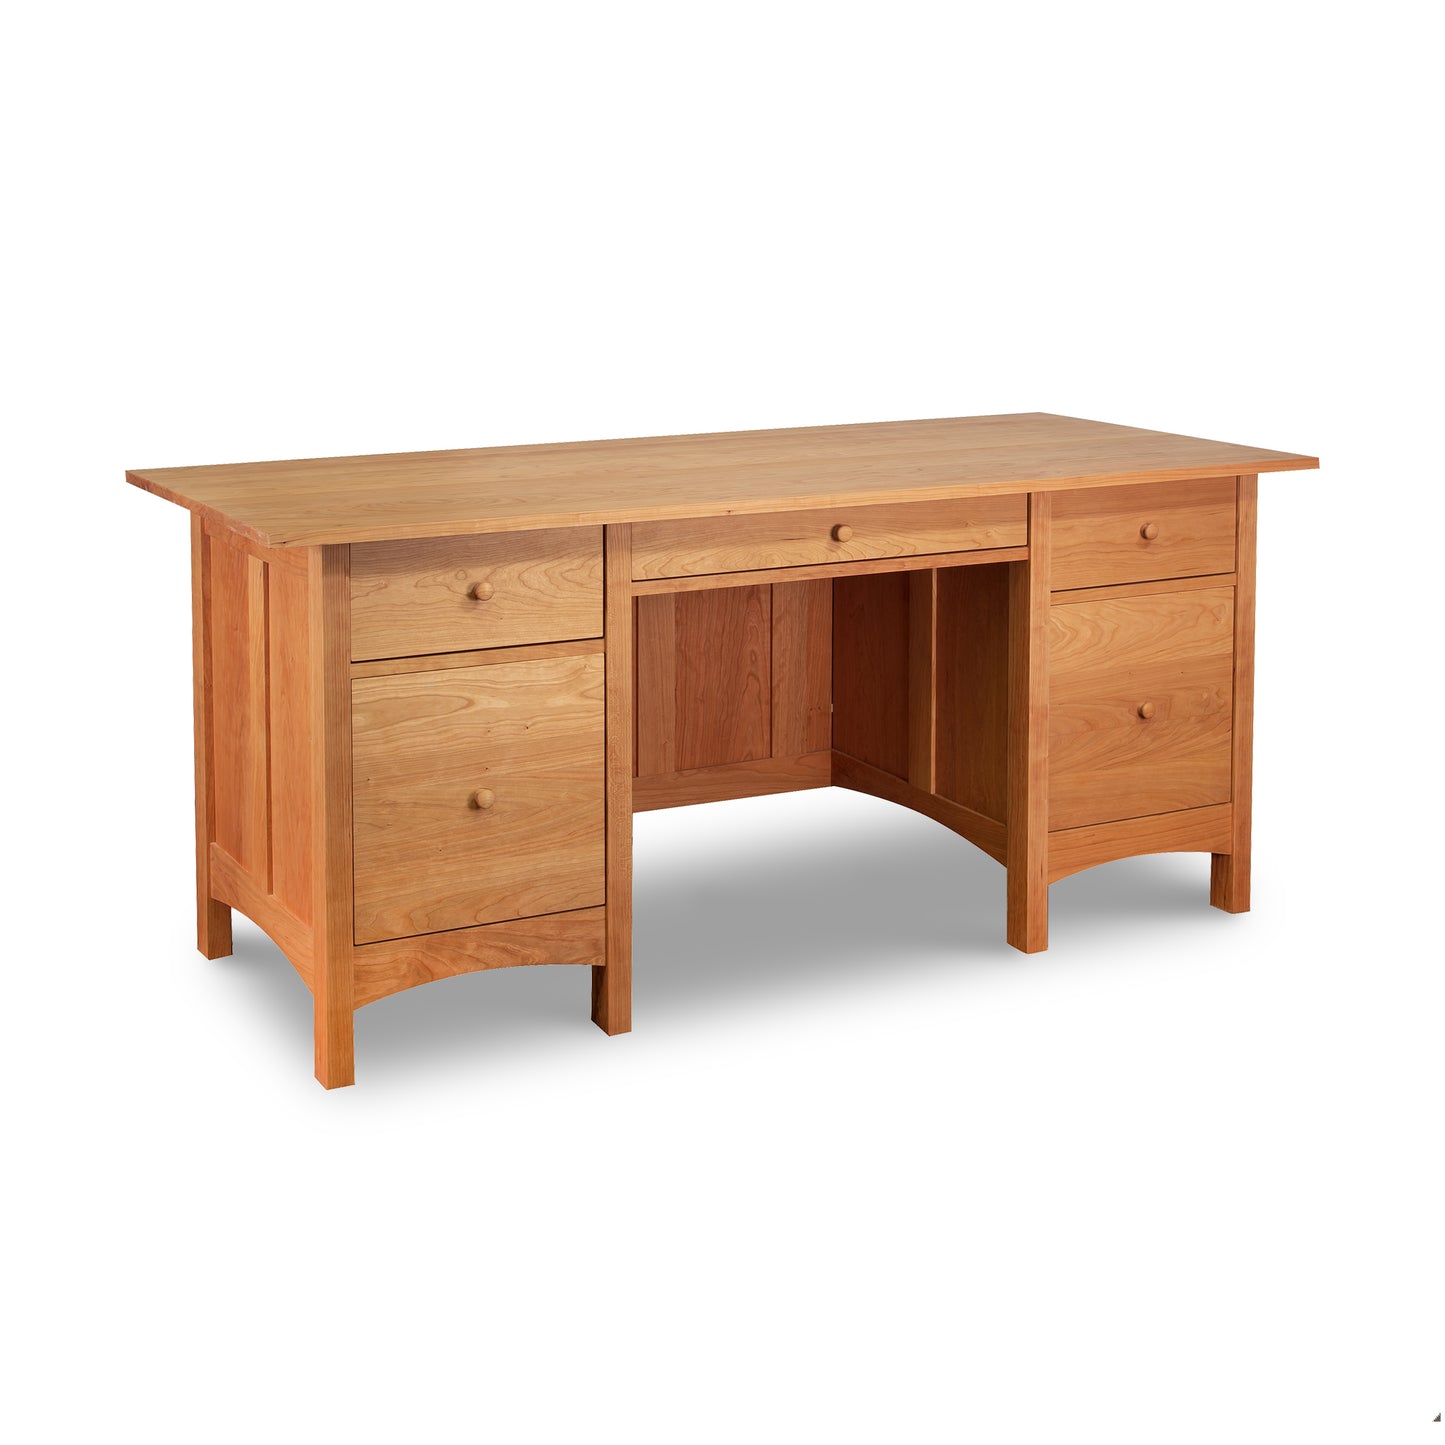 Burlington Shaker Executive Desk from Vermont Furniture Designs, with multiple drawers and a cabinet, isolated on a white background.